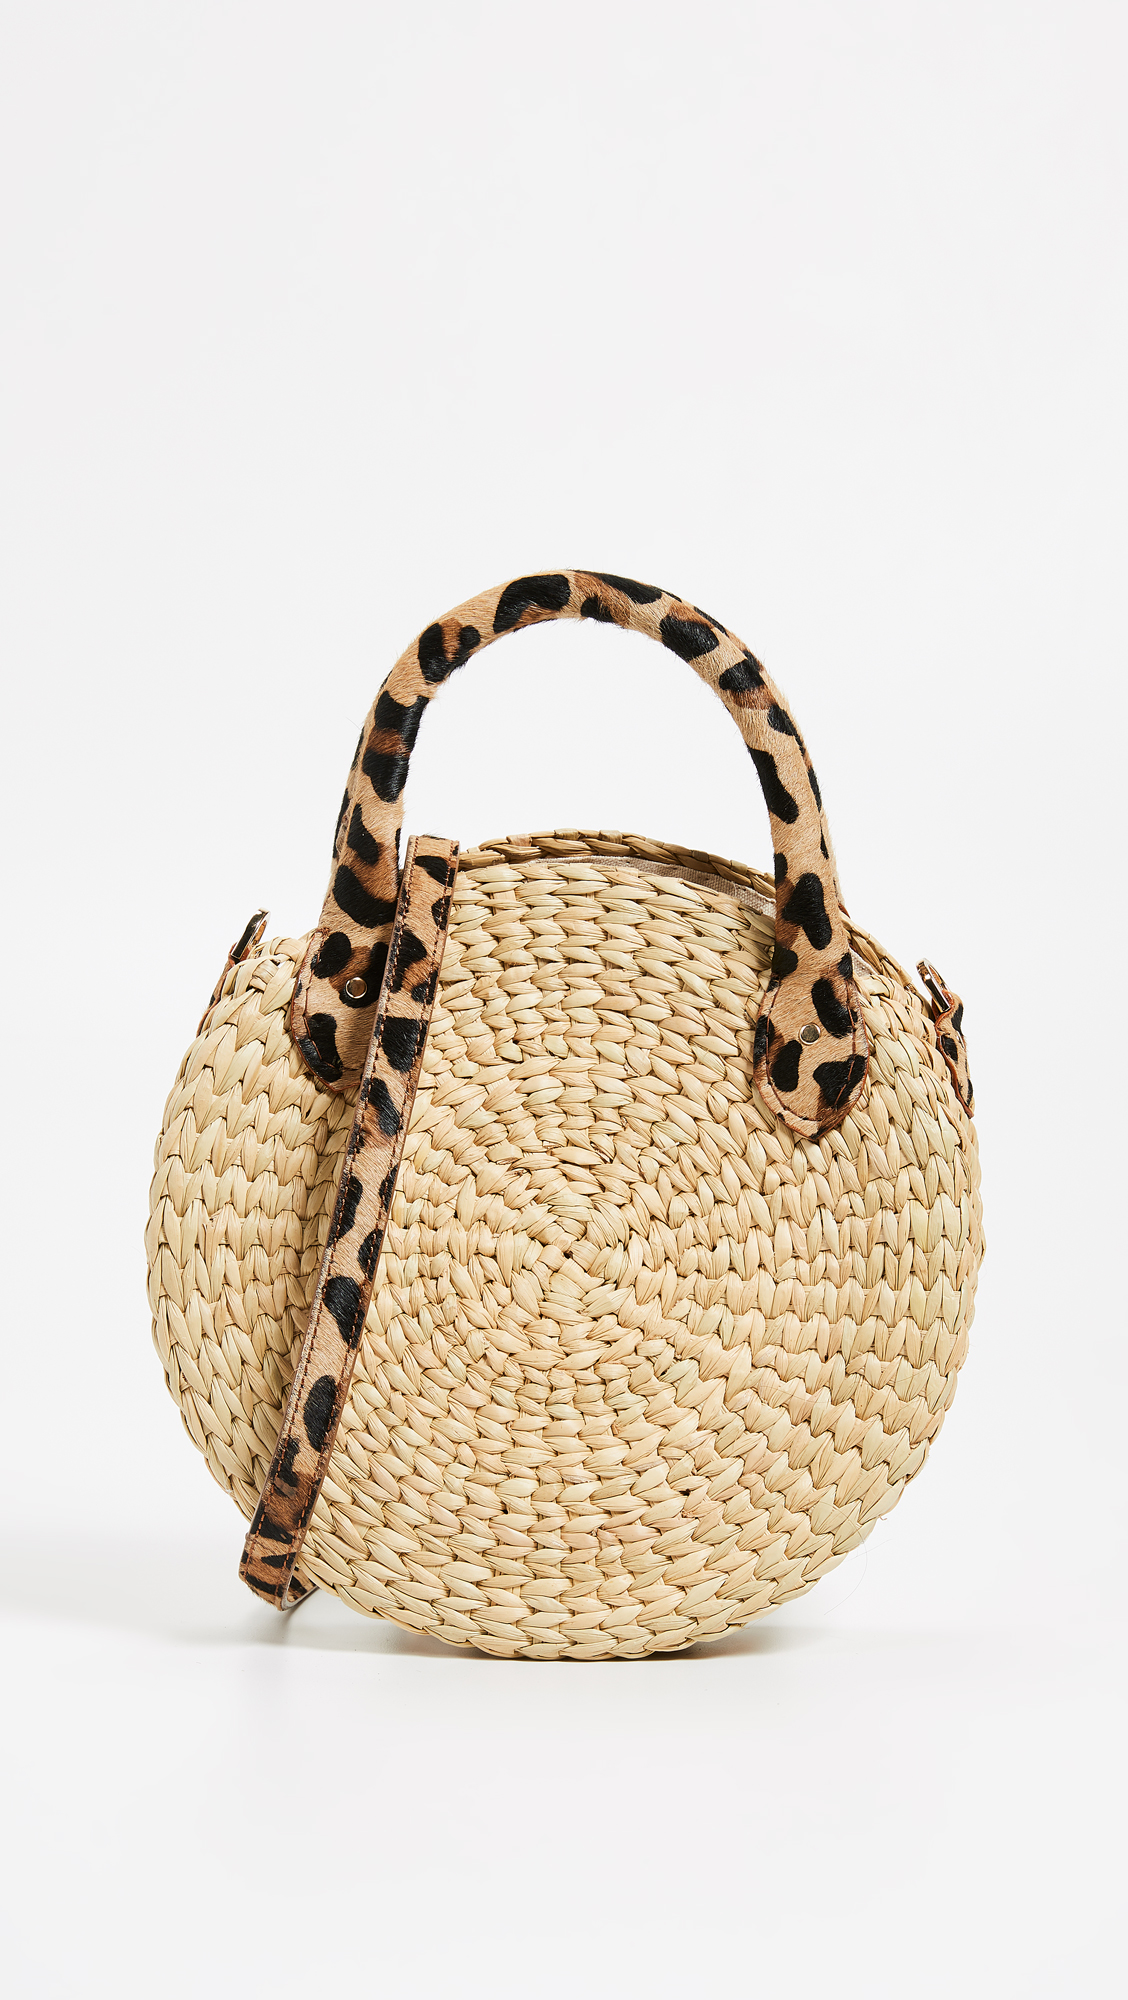 Straw Bag with Fur Leopard Print Handle